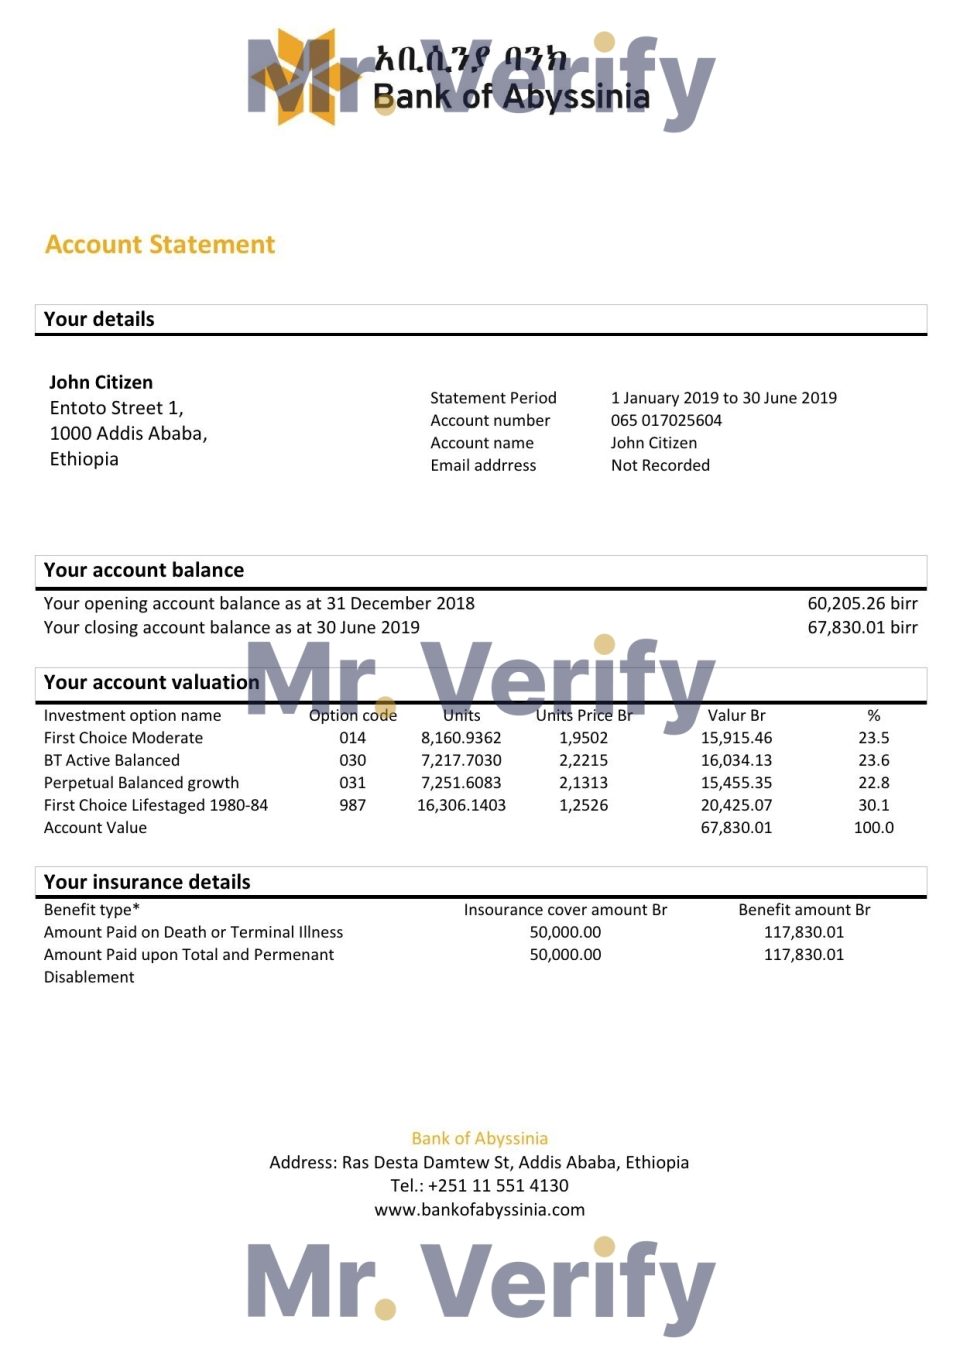 Ethiopia Bank of Abyssinia bank statement easy to fill template in .xls and .pdf file format